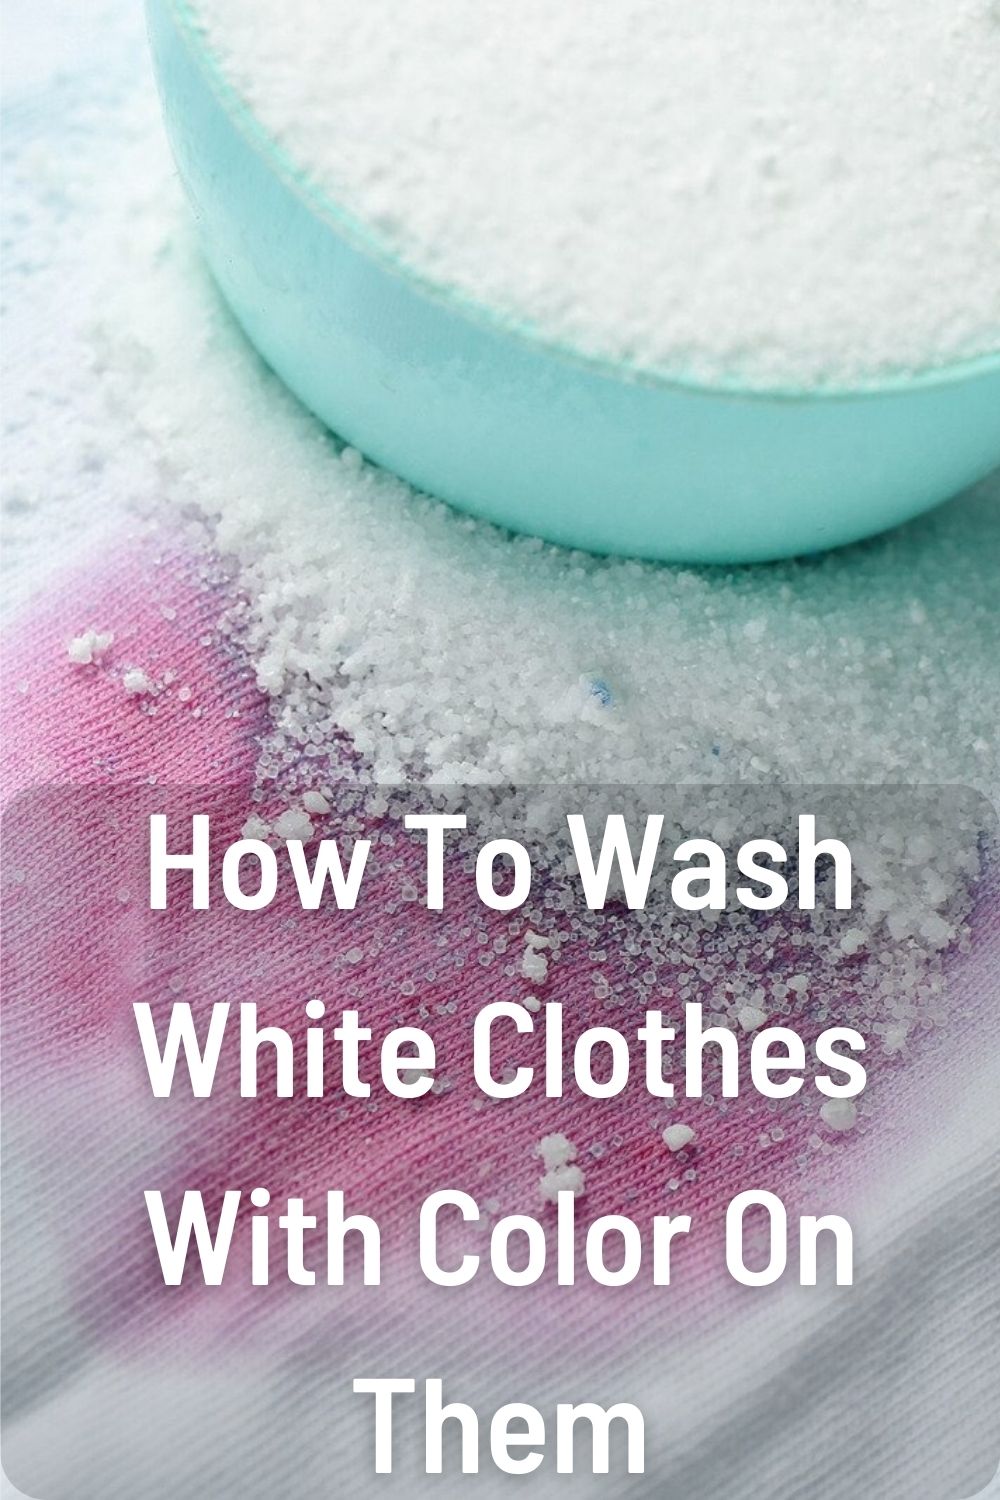 How To Wash White Clothes With Color On Them